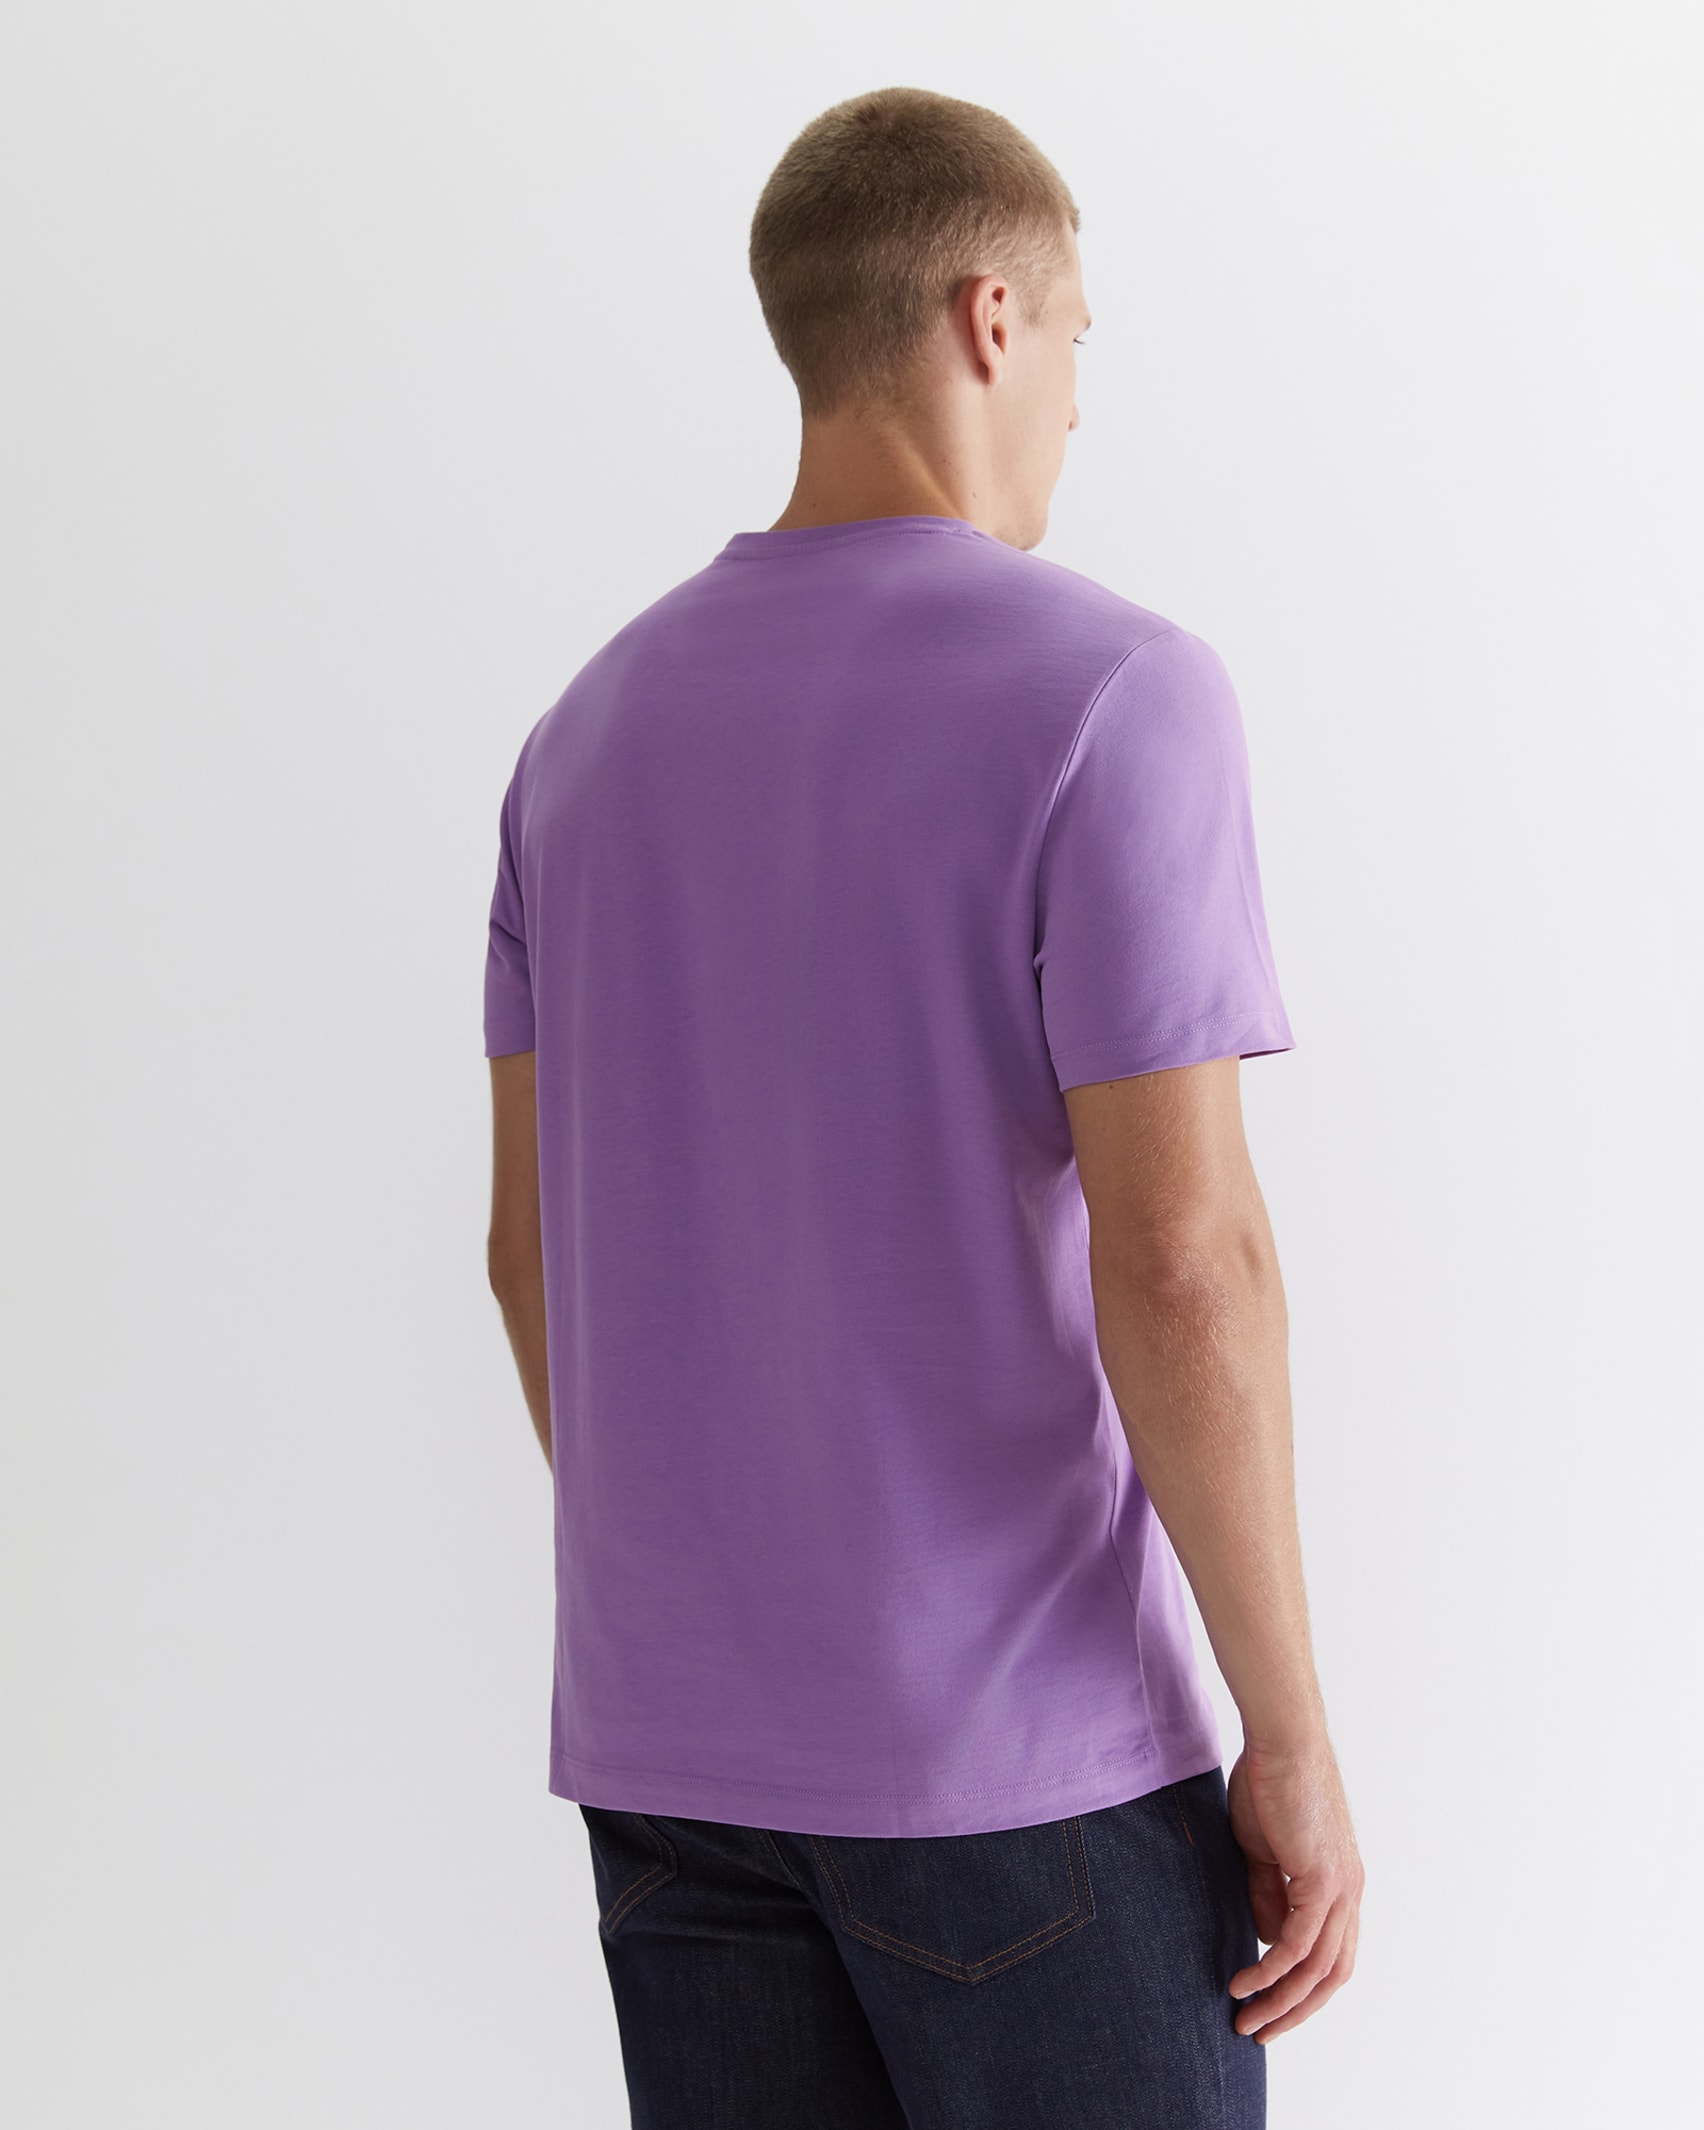 Supersoft Tee in LILAC